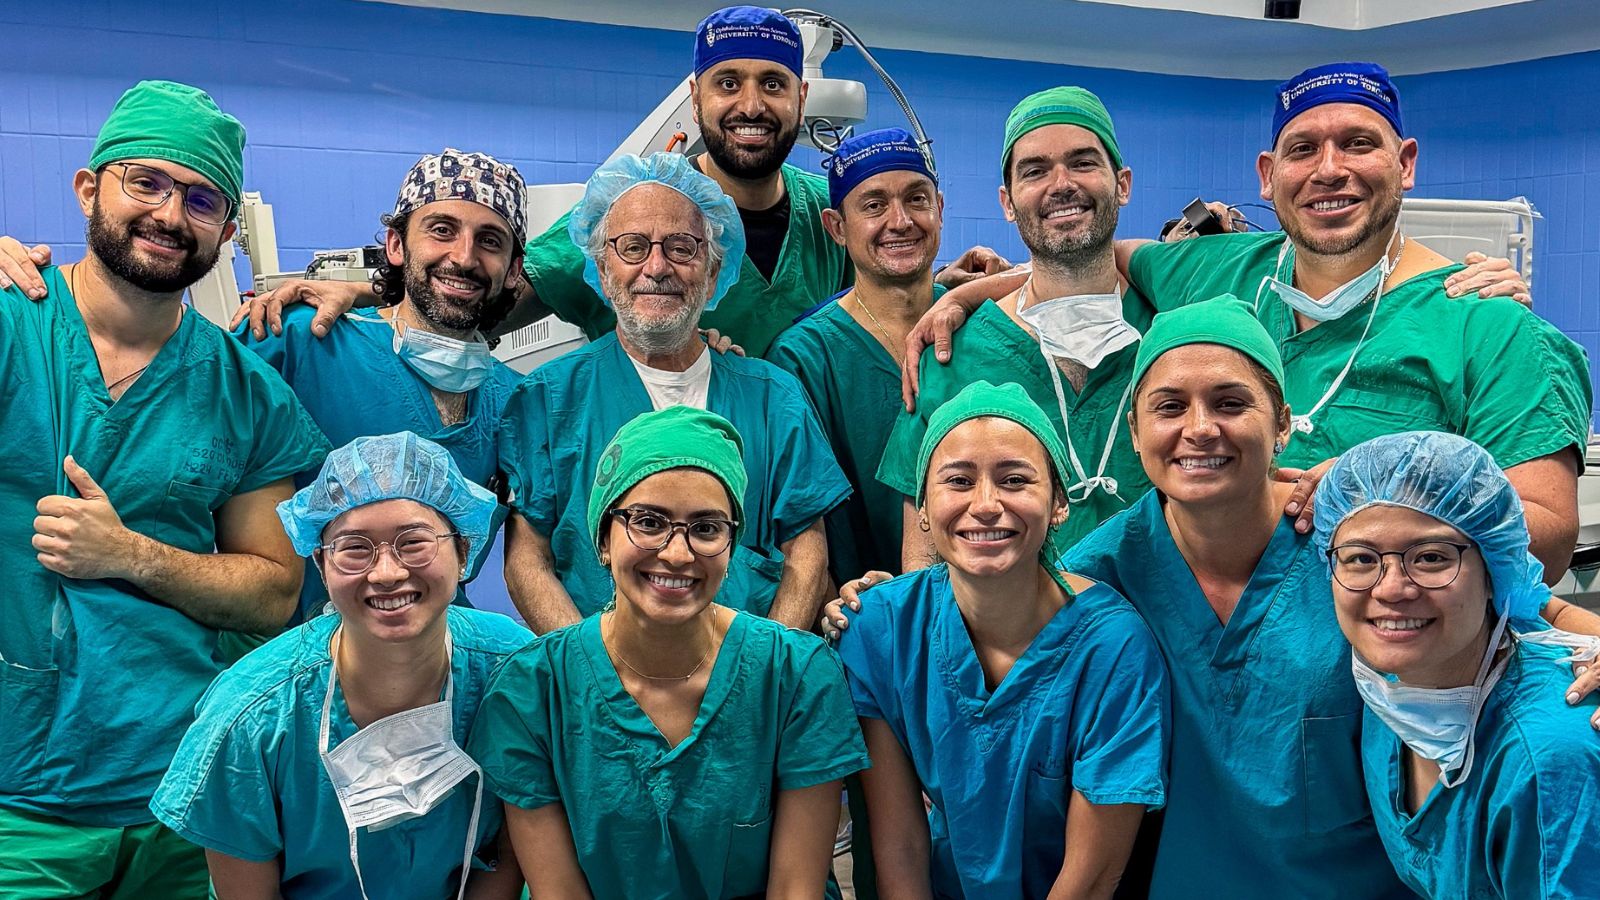 The team of faculty, residents and fellows from Canada, along with Costa Rican surgeons. (Photo: Courtesy Alonso Gutierrez)